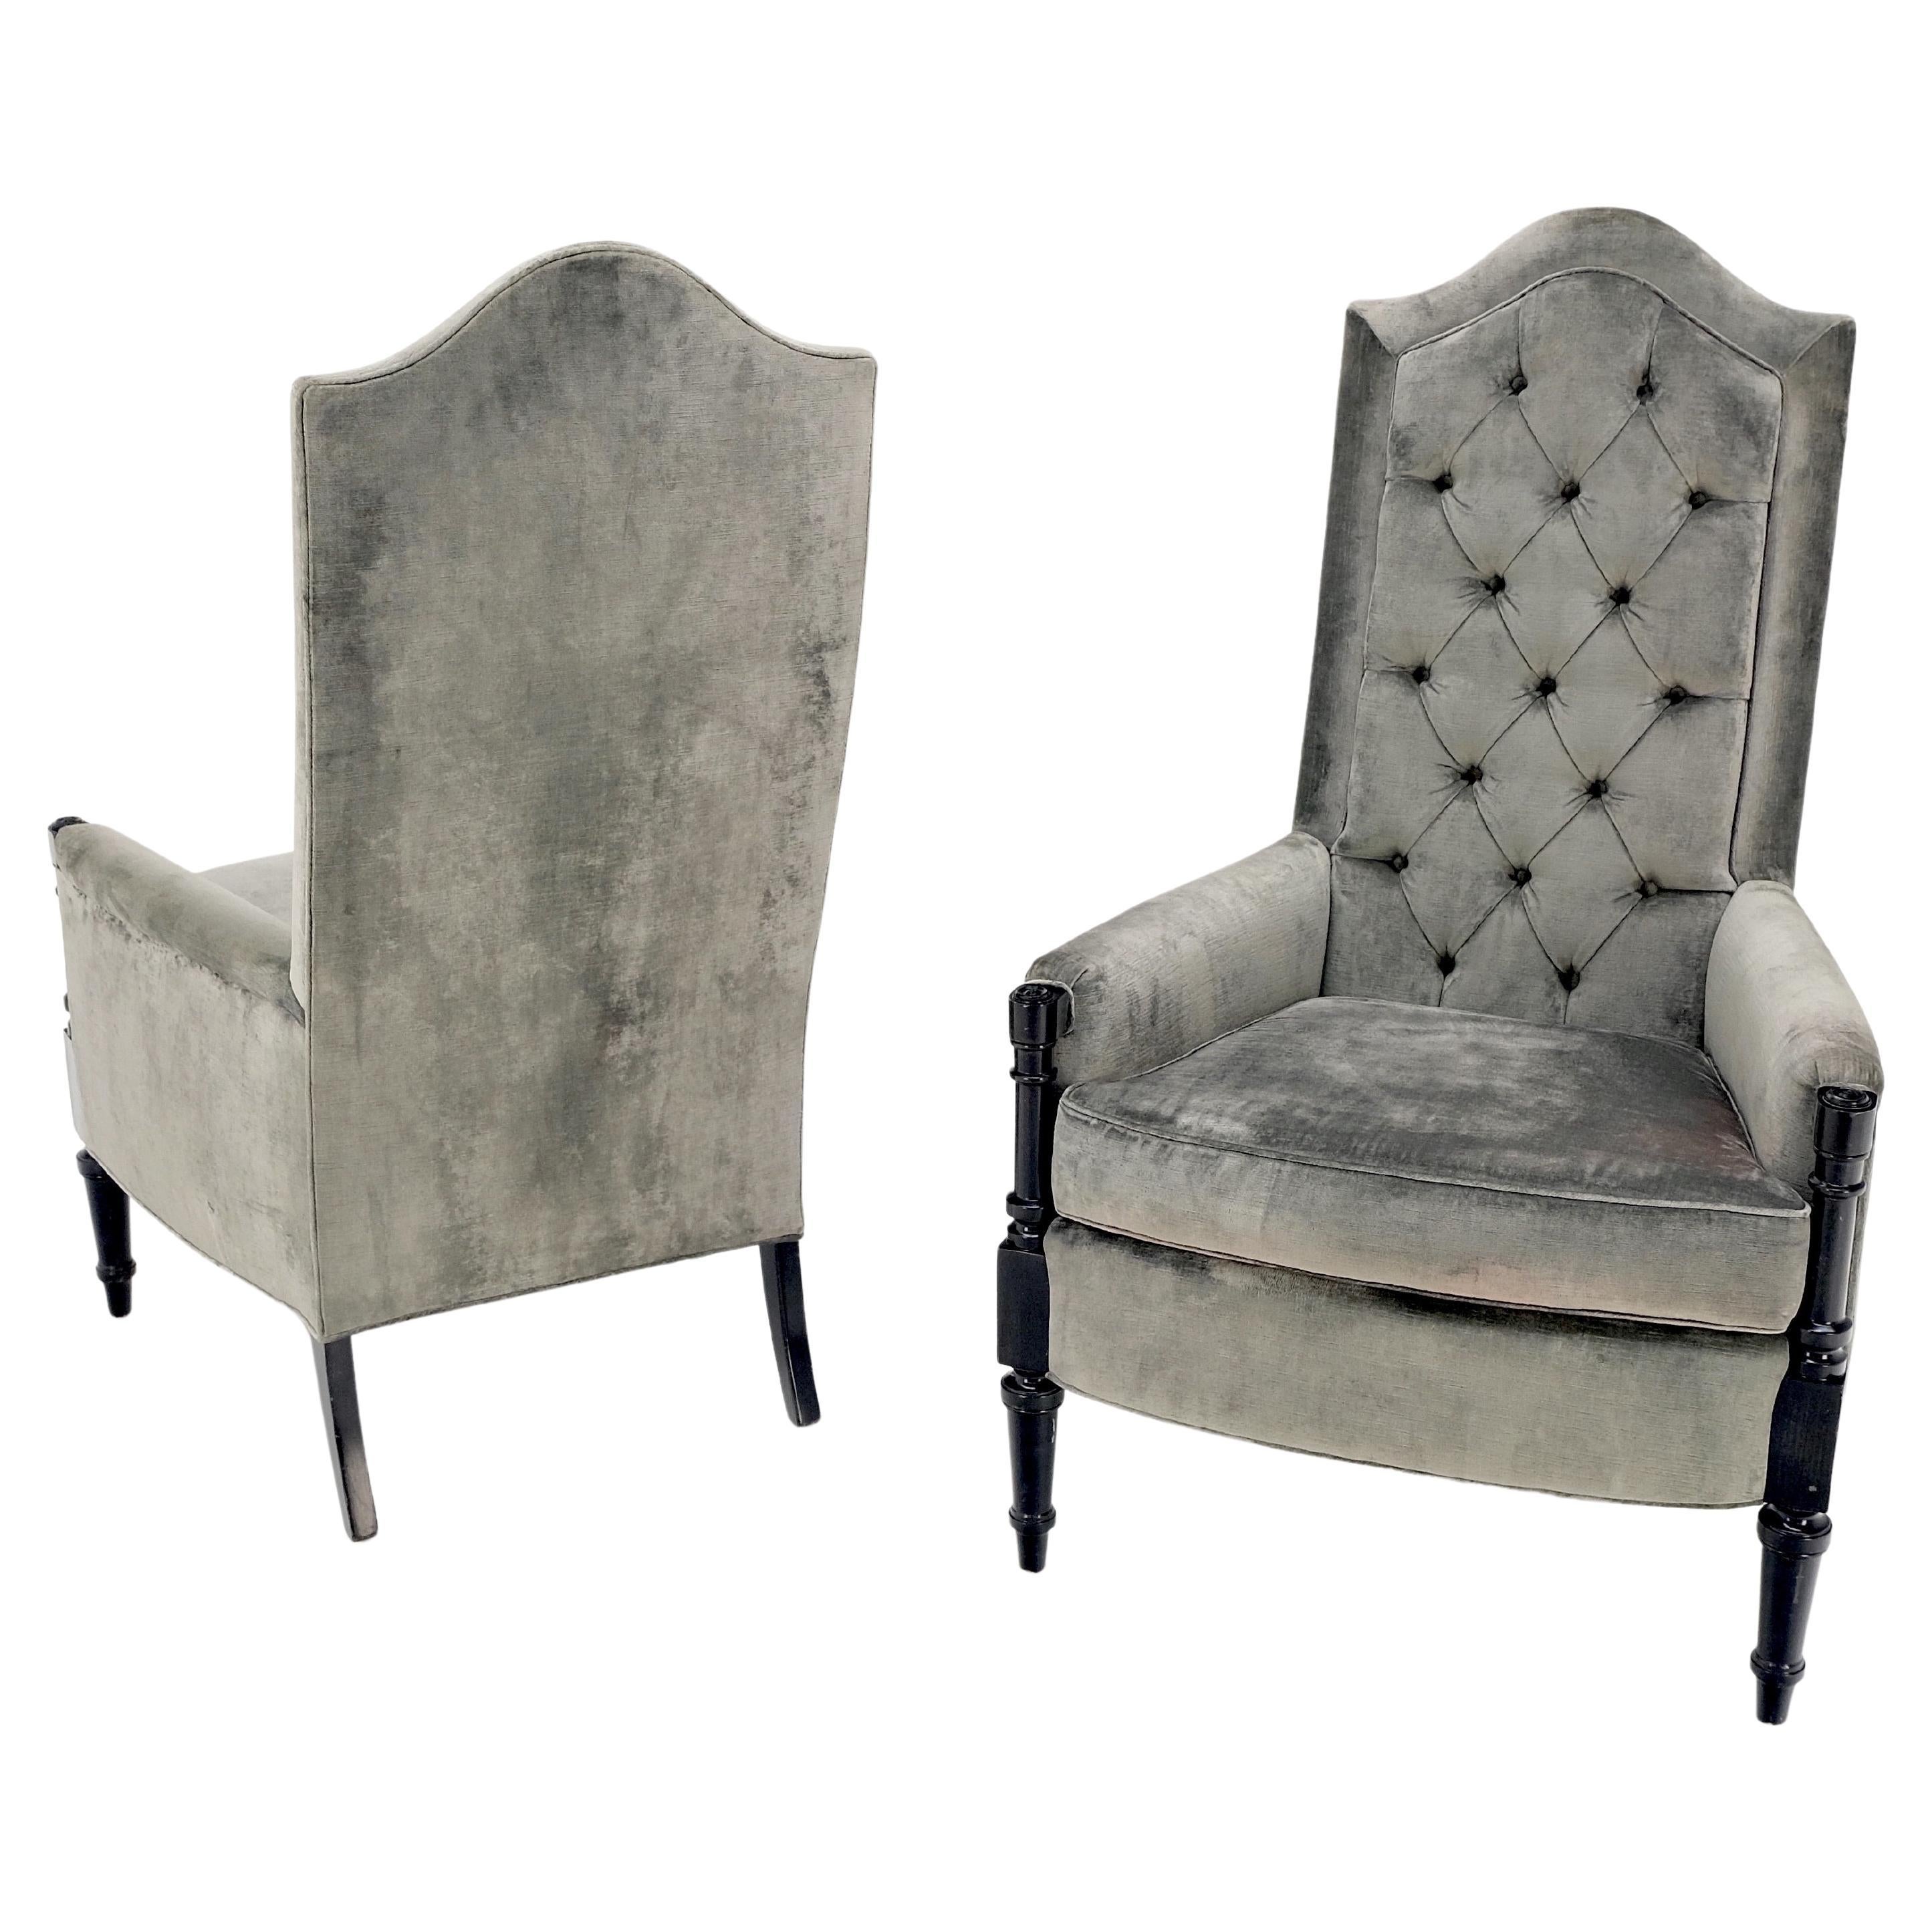 Pair of Tall Tufted Backs Black Lacquer Frames Decorative Arm Chairs Thrones For Sale